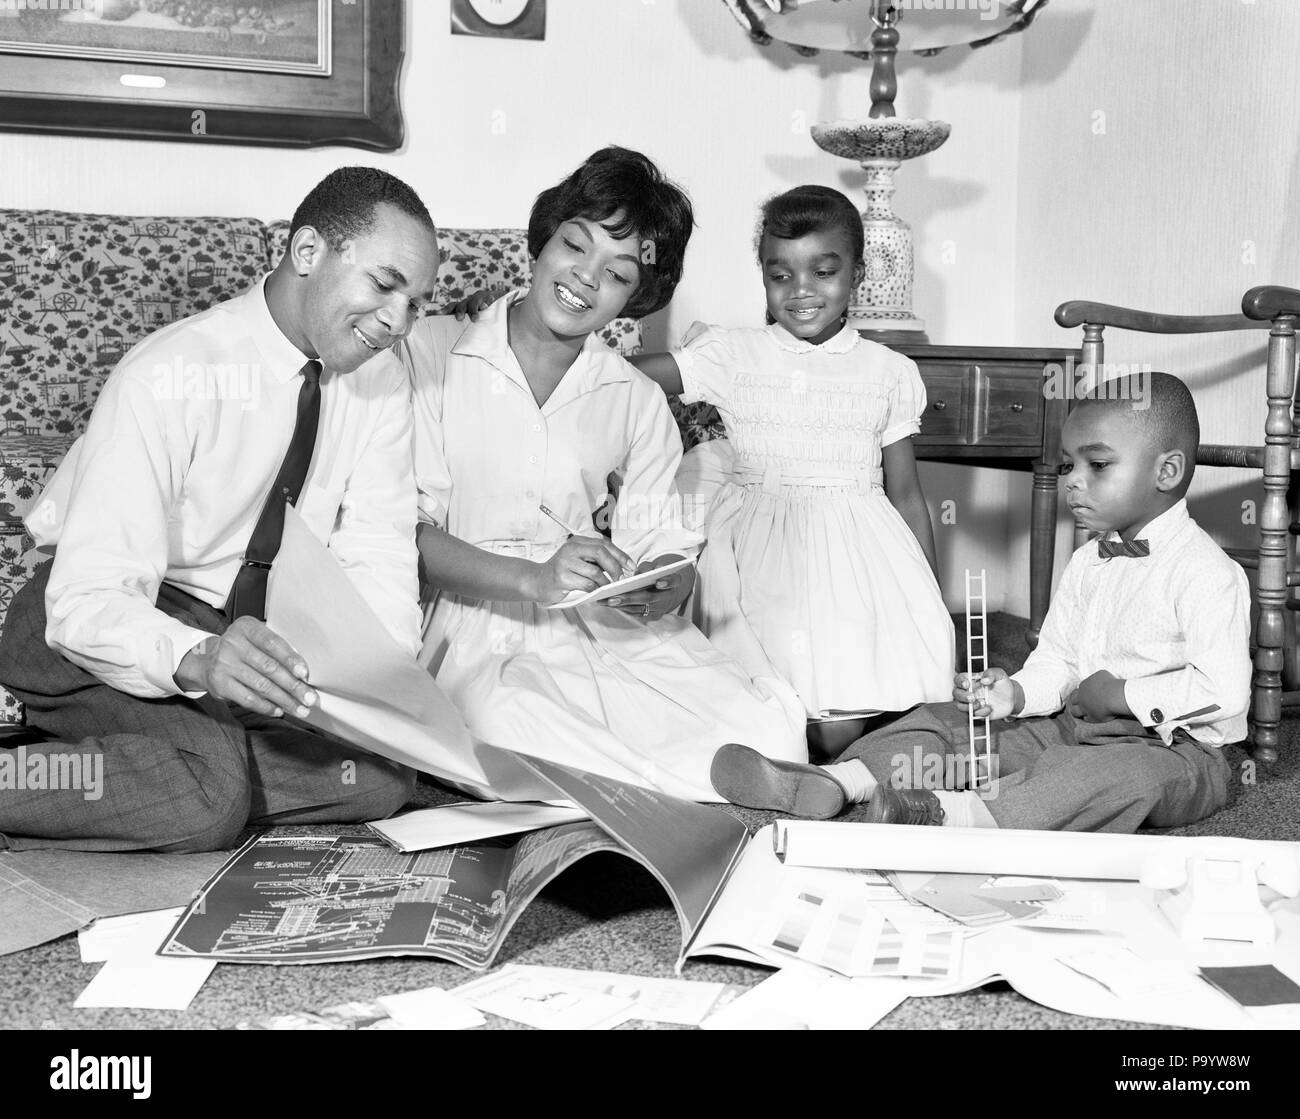 1960s AFRICAN AMERICAN FAMILY LOOKING AT BLUEPRINTS PLANNING FOR A NEW HOME BOY GIRL MOTHER FATHER - n1826 HAR001 HARS SISTER JUVENILE TEAMWORK INFORMATION SONS JOY LIFESTYLE FEMALES BROTHERS HOME LIFE HALF-LENGTH DAUGHTERS INSPIRATION MALES PLANNING SIBLINGS SISTERS BLUEPRINTS FATHERS B&W DREAMS HAPPINESS ADVENTURE AFRICAN-AMERICANS AFRICAN-AMERICAN CHOICE DADS EXCITEMENT BLACK ETHNICITY DIRECTION AT SIBLING COOPERATION GROWTH IDEAS JUVENILES MID-ADULT MID-ADULT MAN MID-ADULT WOMAN MOMS SOLUTIONS TOGETHERNESS BLACK AND WHITE HAR001 OLD FASHIONED AFRICAN AMERICANS Stock Photo